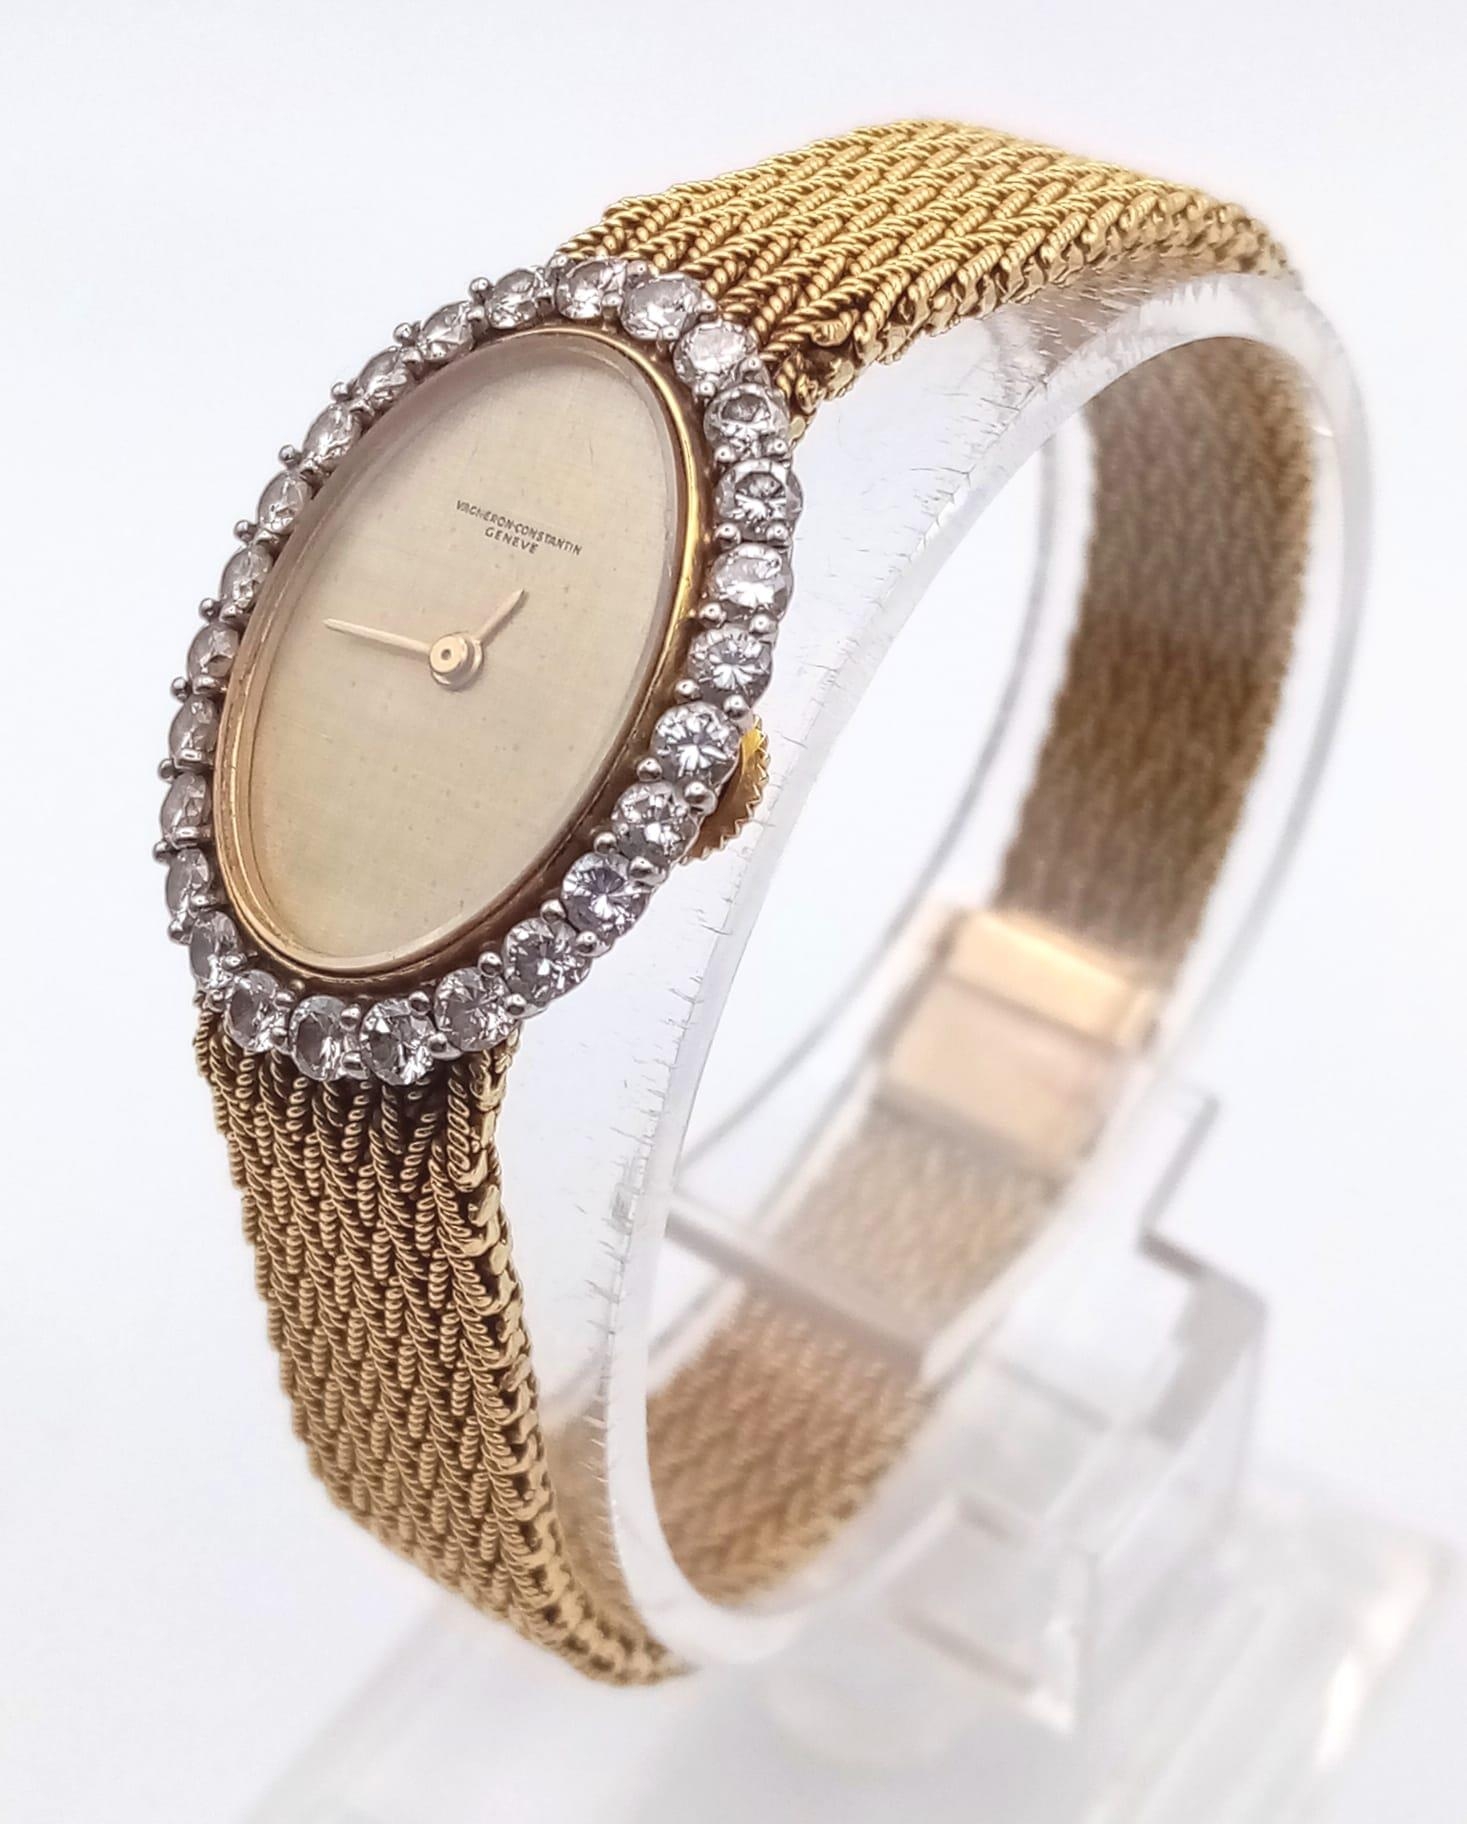 A Vacheron-Constantin 18K Yellow Gold and Diamond Ladies Watch. Gold bracelet and oval case - - Image 3 of 8